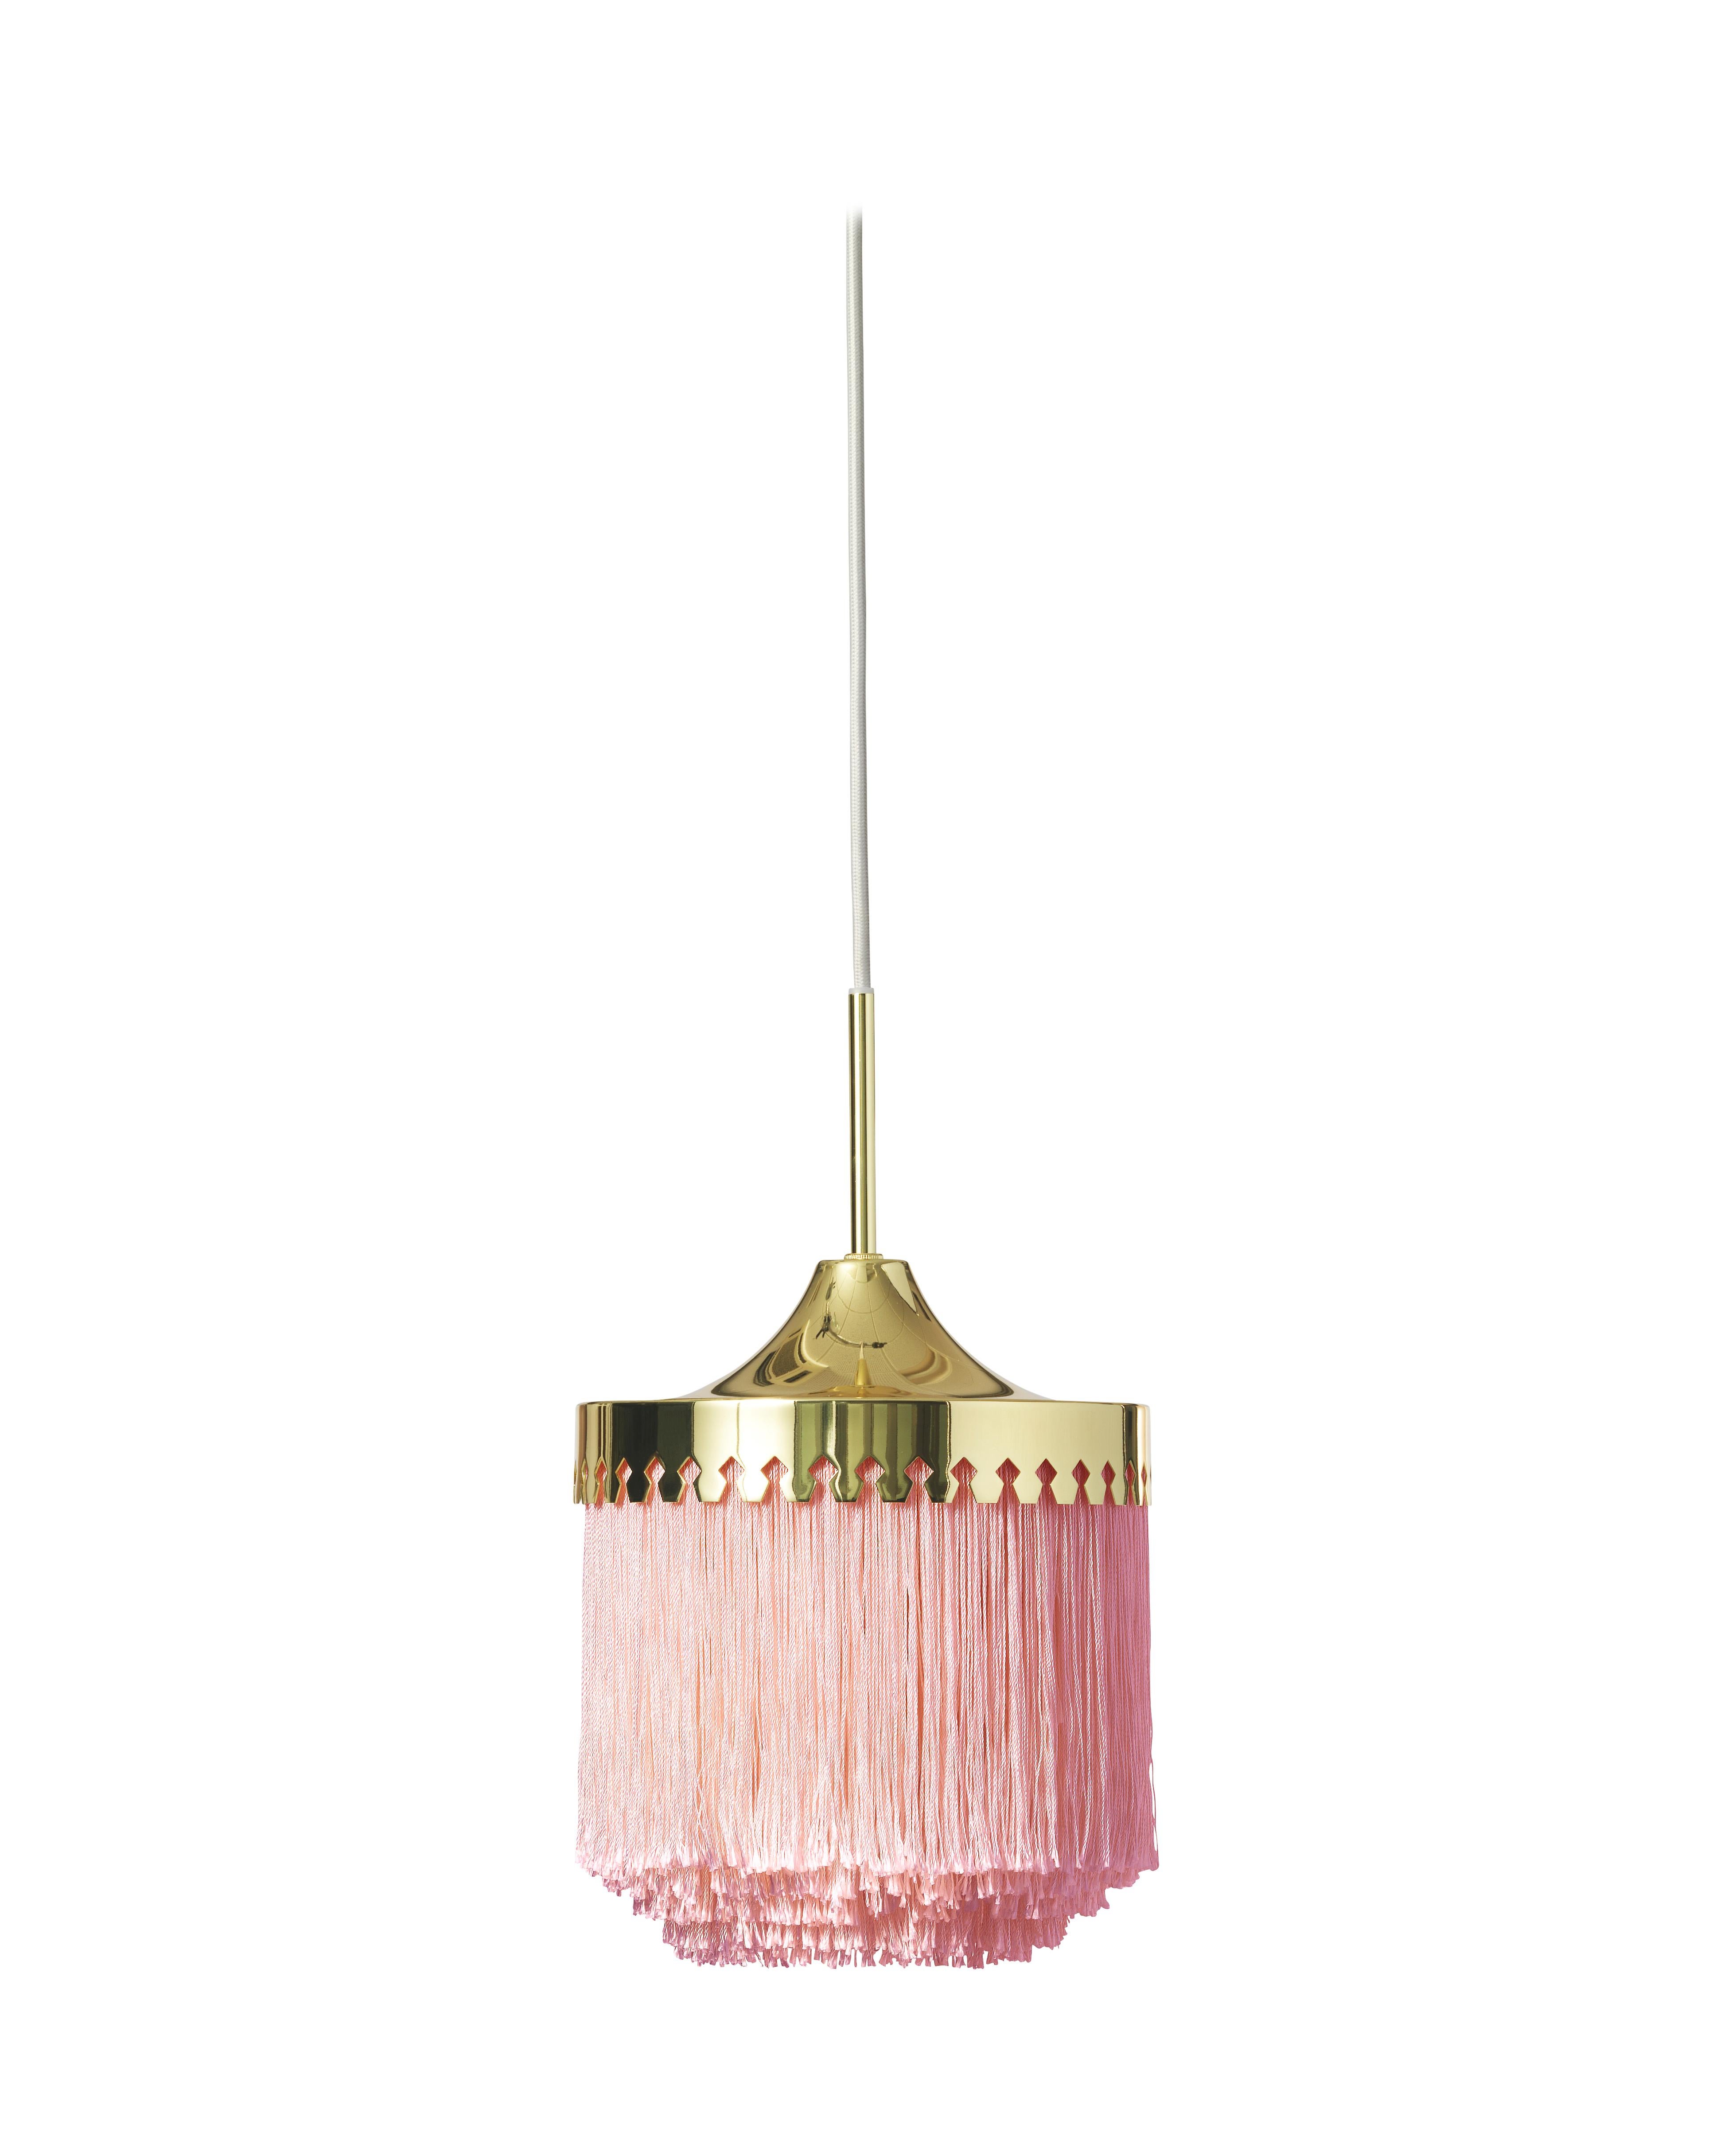 For Sale: Pink (Pale Pink) Fringe Small Pendant, by Hans Agne Jakobsson from Warm Nordic